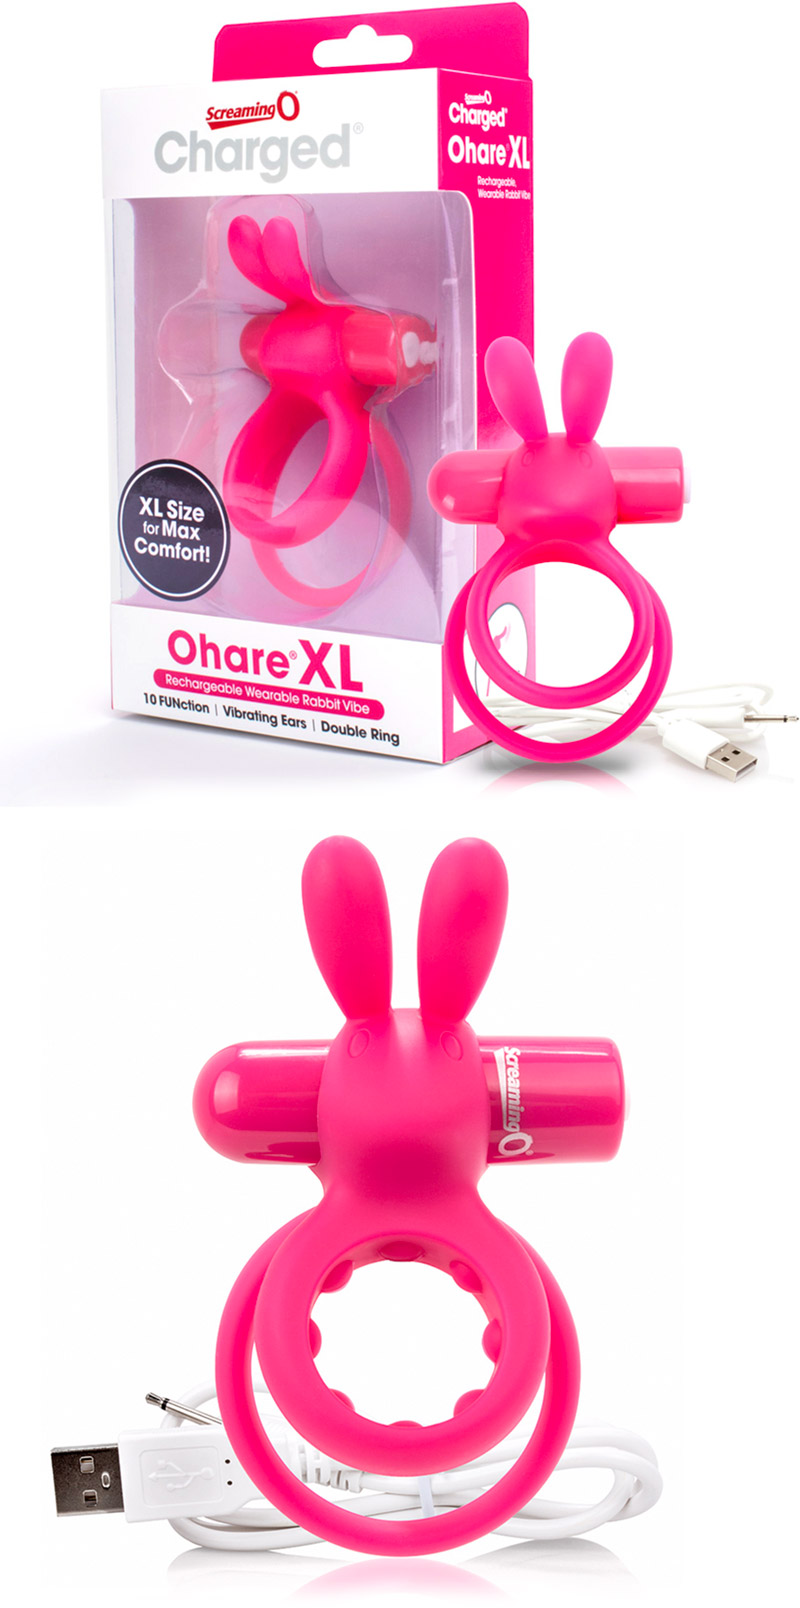 Screaming O Charged Ohare XL vibrating double ring